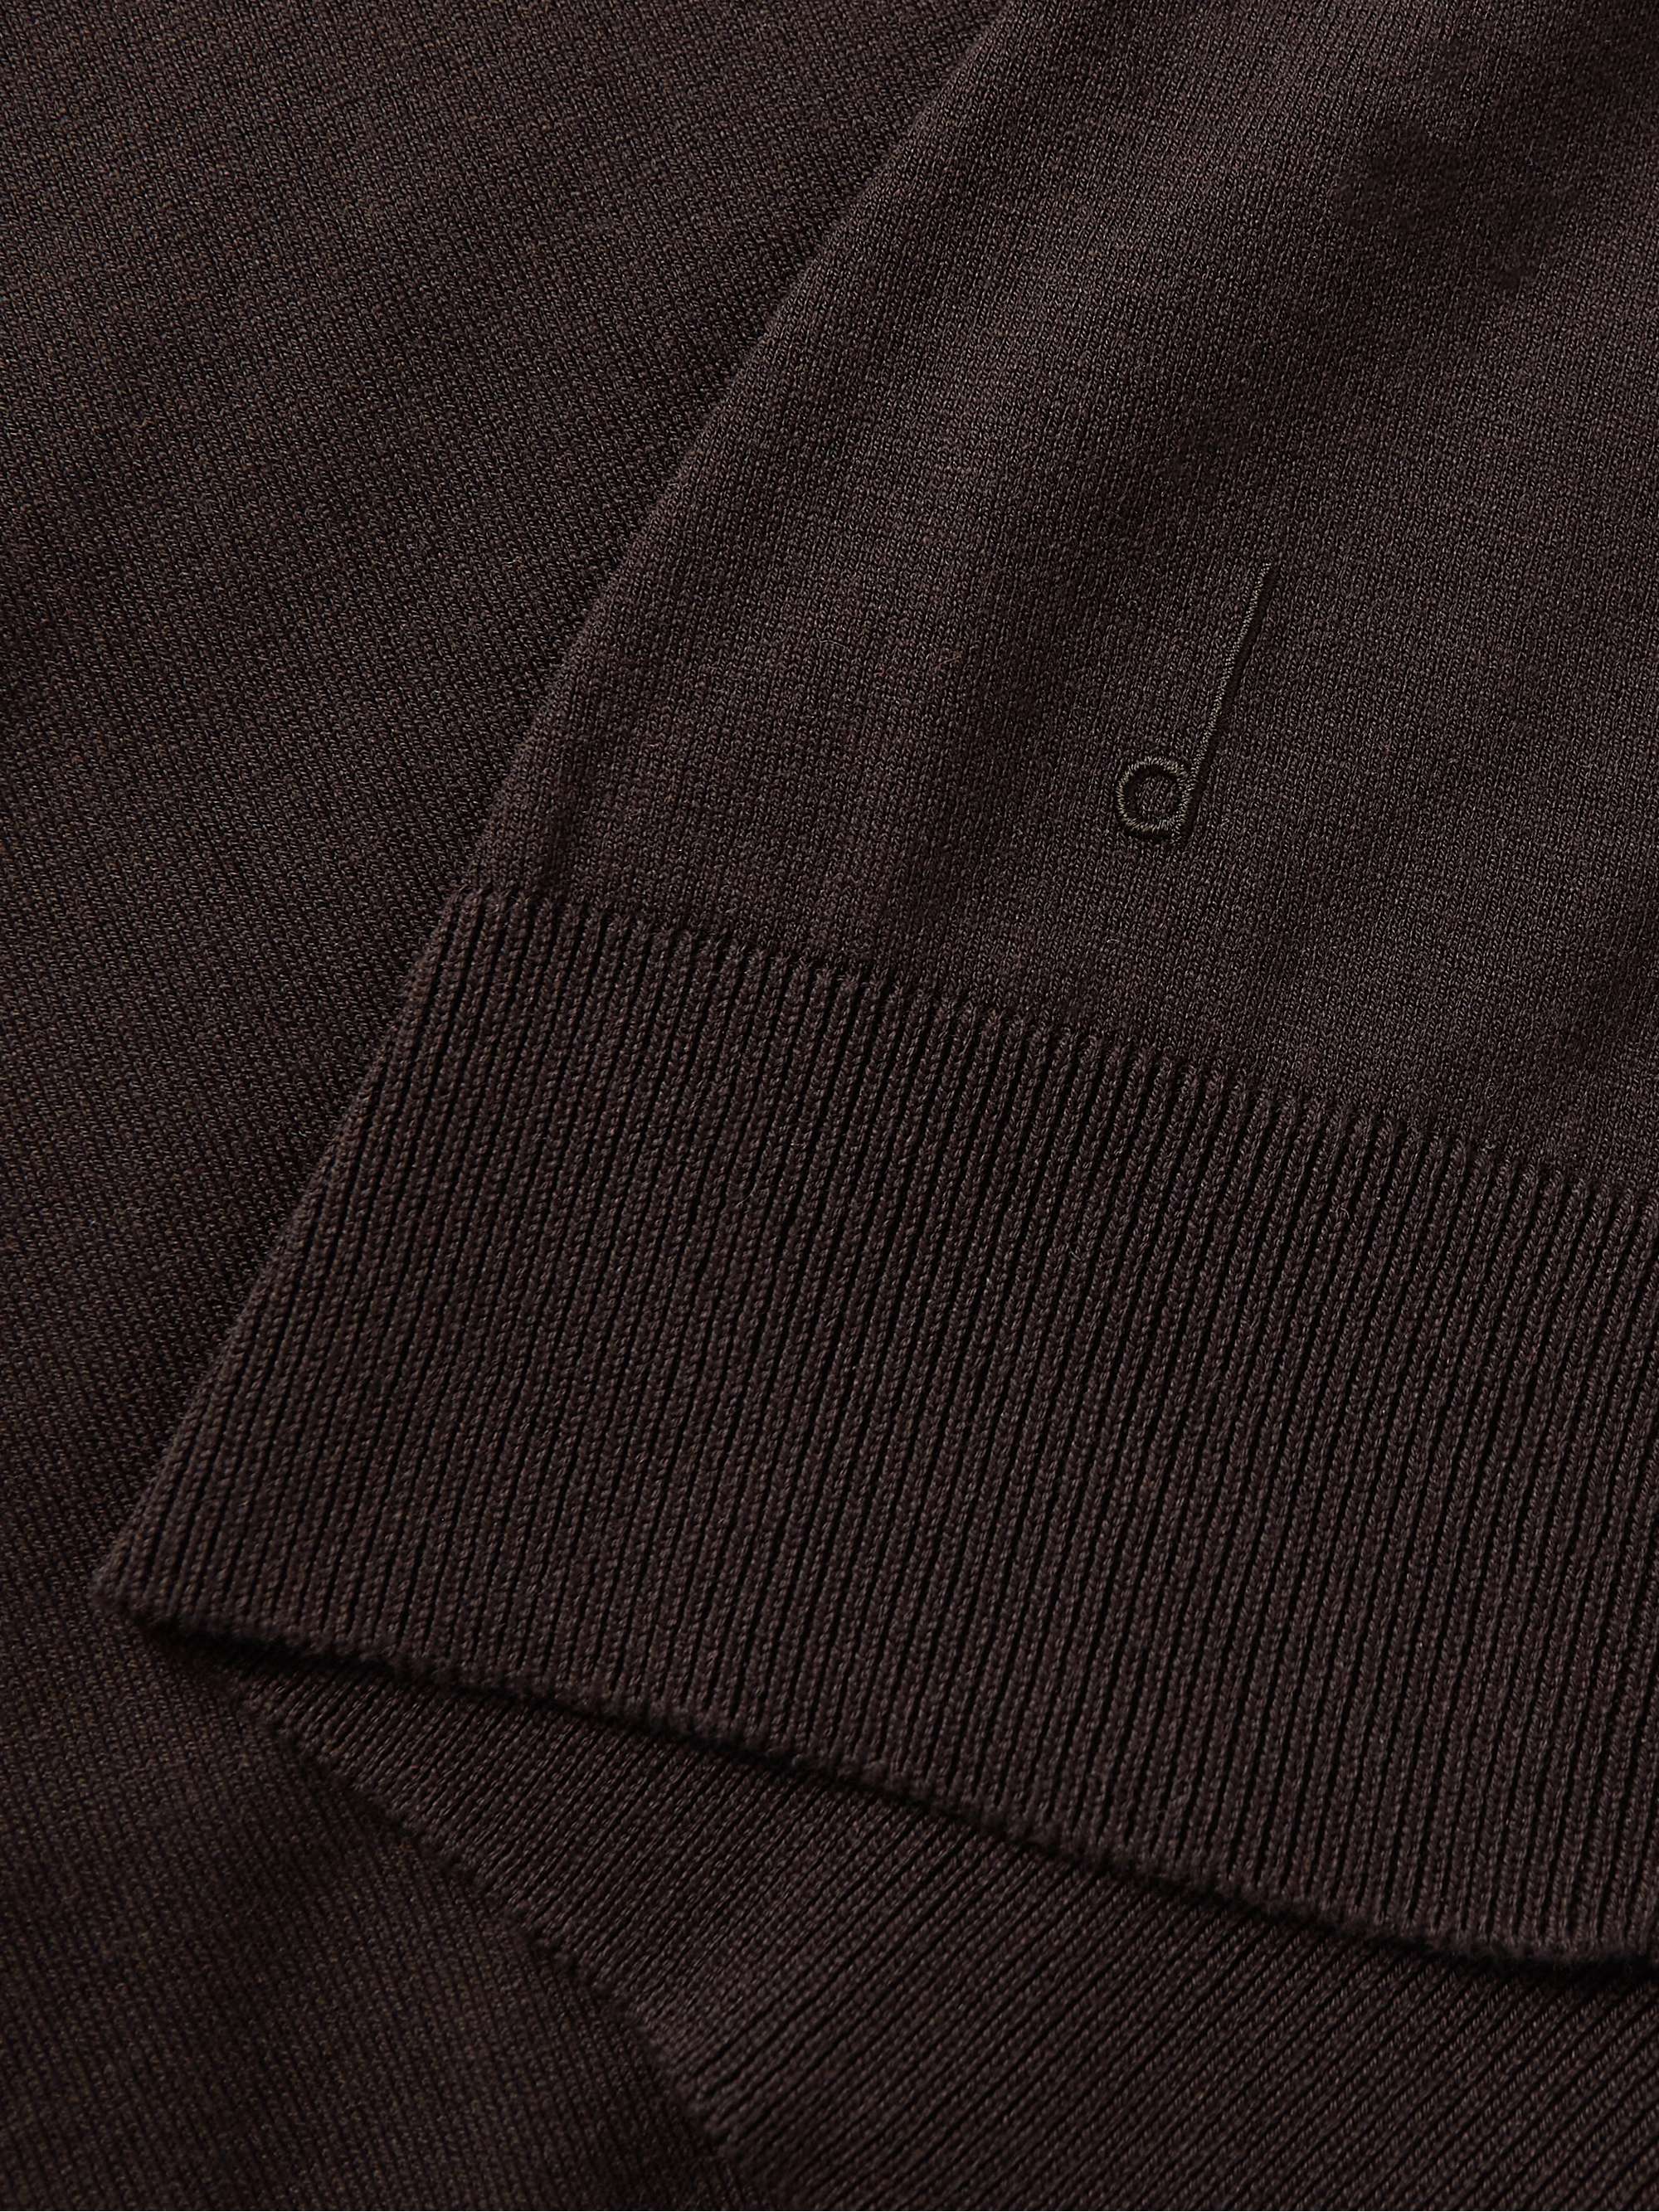 DUNHILL Slim-Fit Mulberry Silk and Cotton-Blend Mock-Neck Sweater